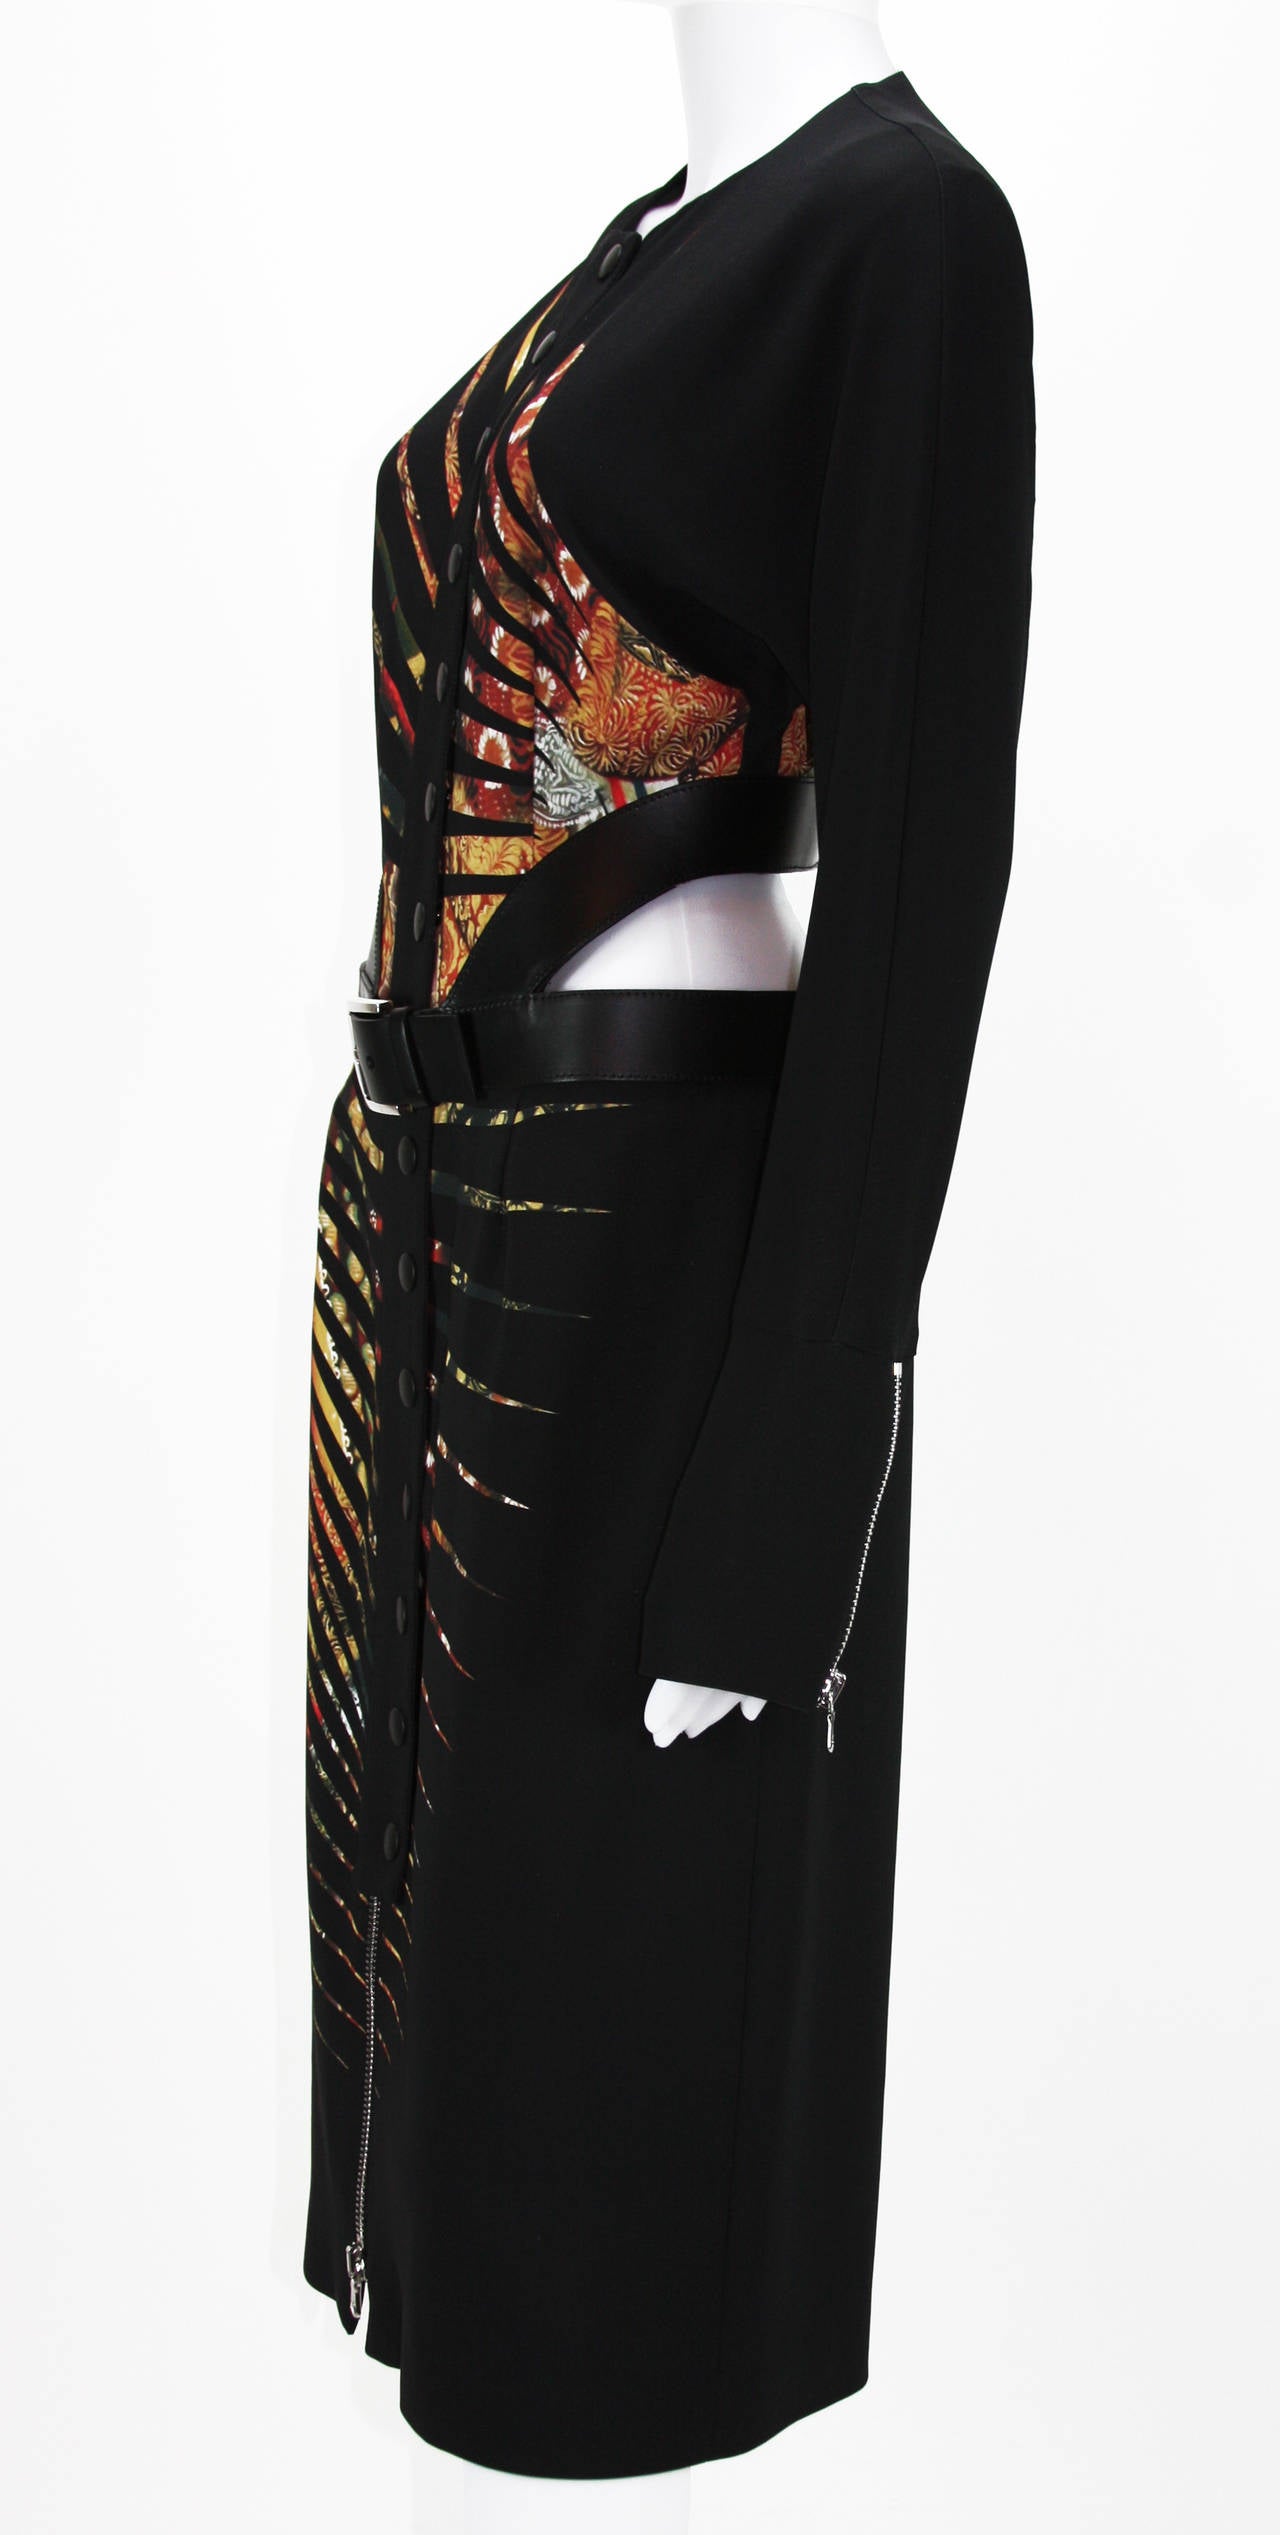 Black New ETRO Runway CUT OUT DRESS with LEATHER BELT